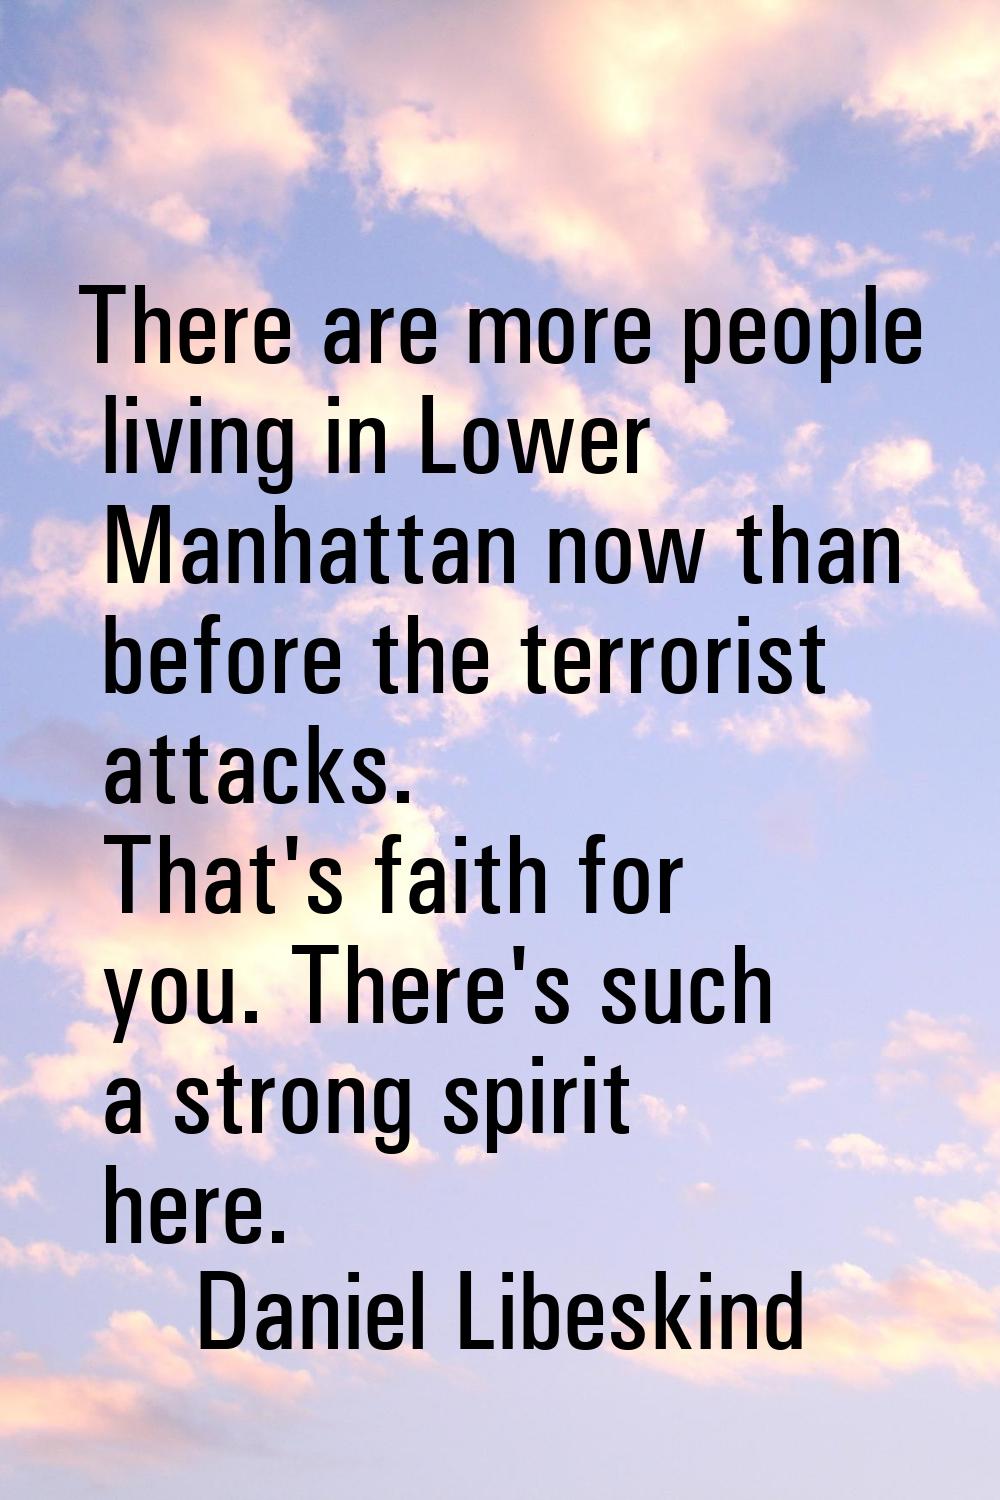 There are more people living in Lower Manhattan now than before the terrorist attacks. That's faith